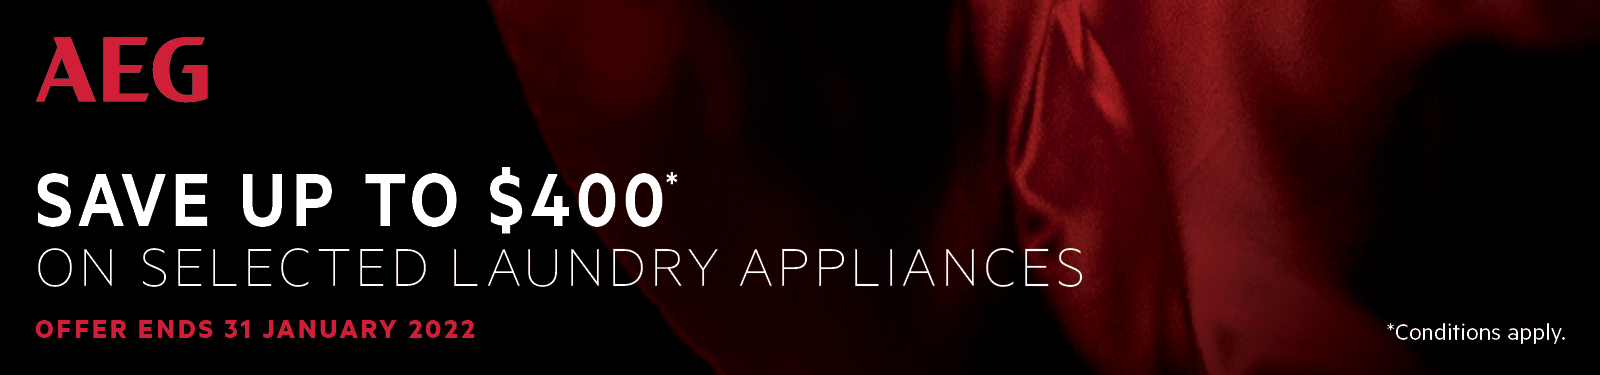 Save up to $400 on selected AEG Laundry Appliances